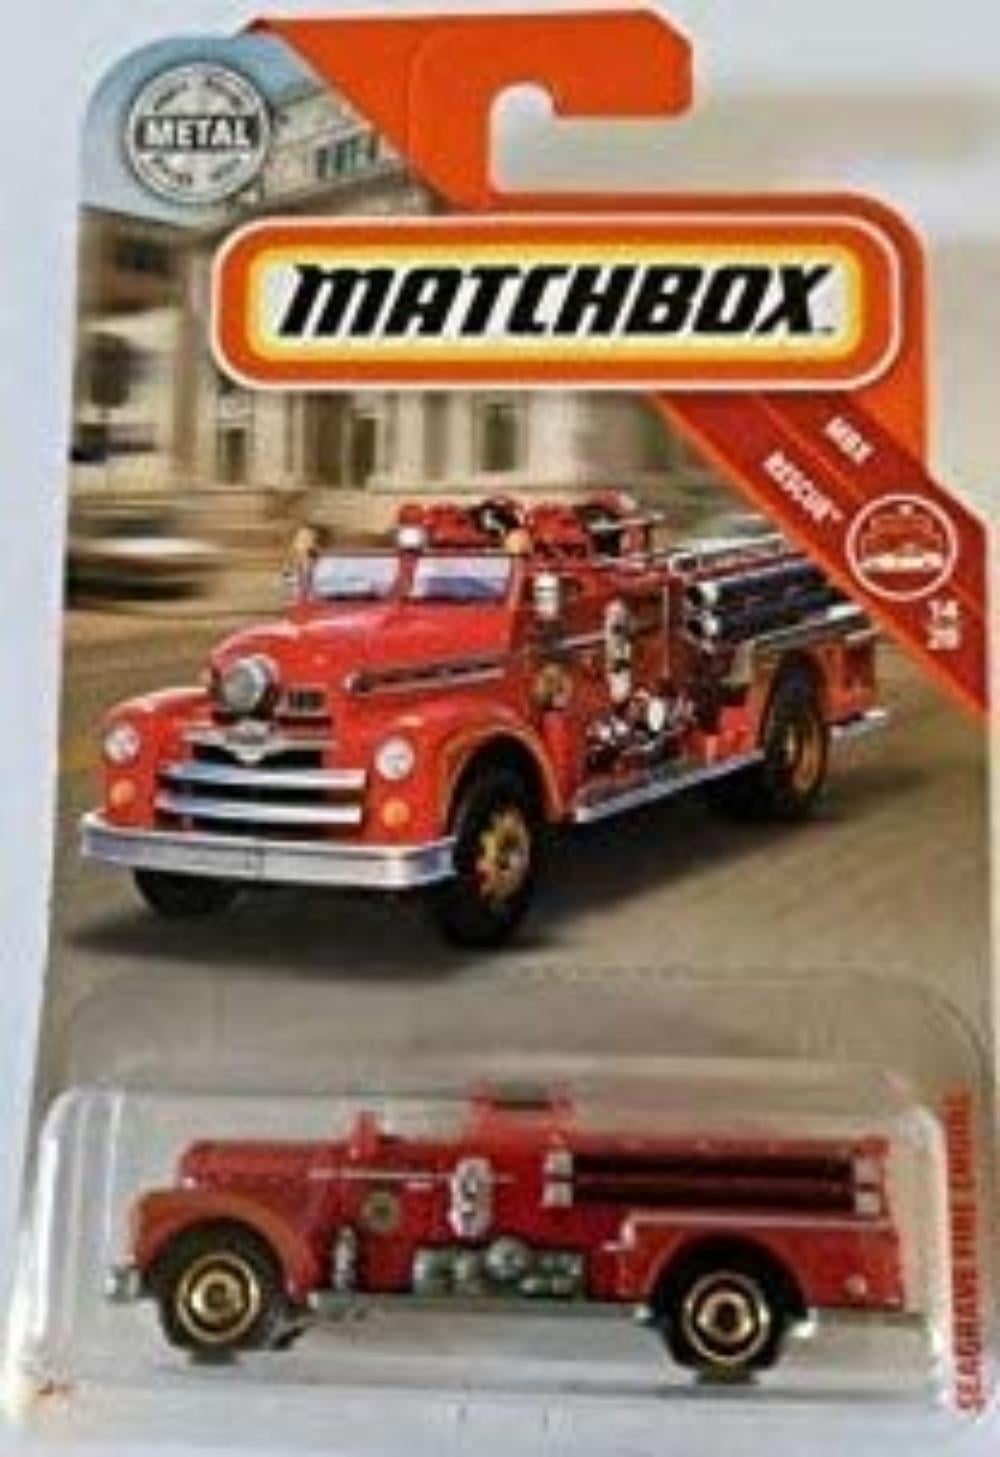 2019 MATCHBOX SEAGRAVE FIRE ENGINE RED NICE!!!!! 